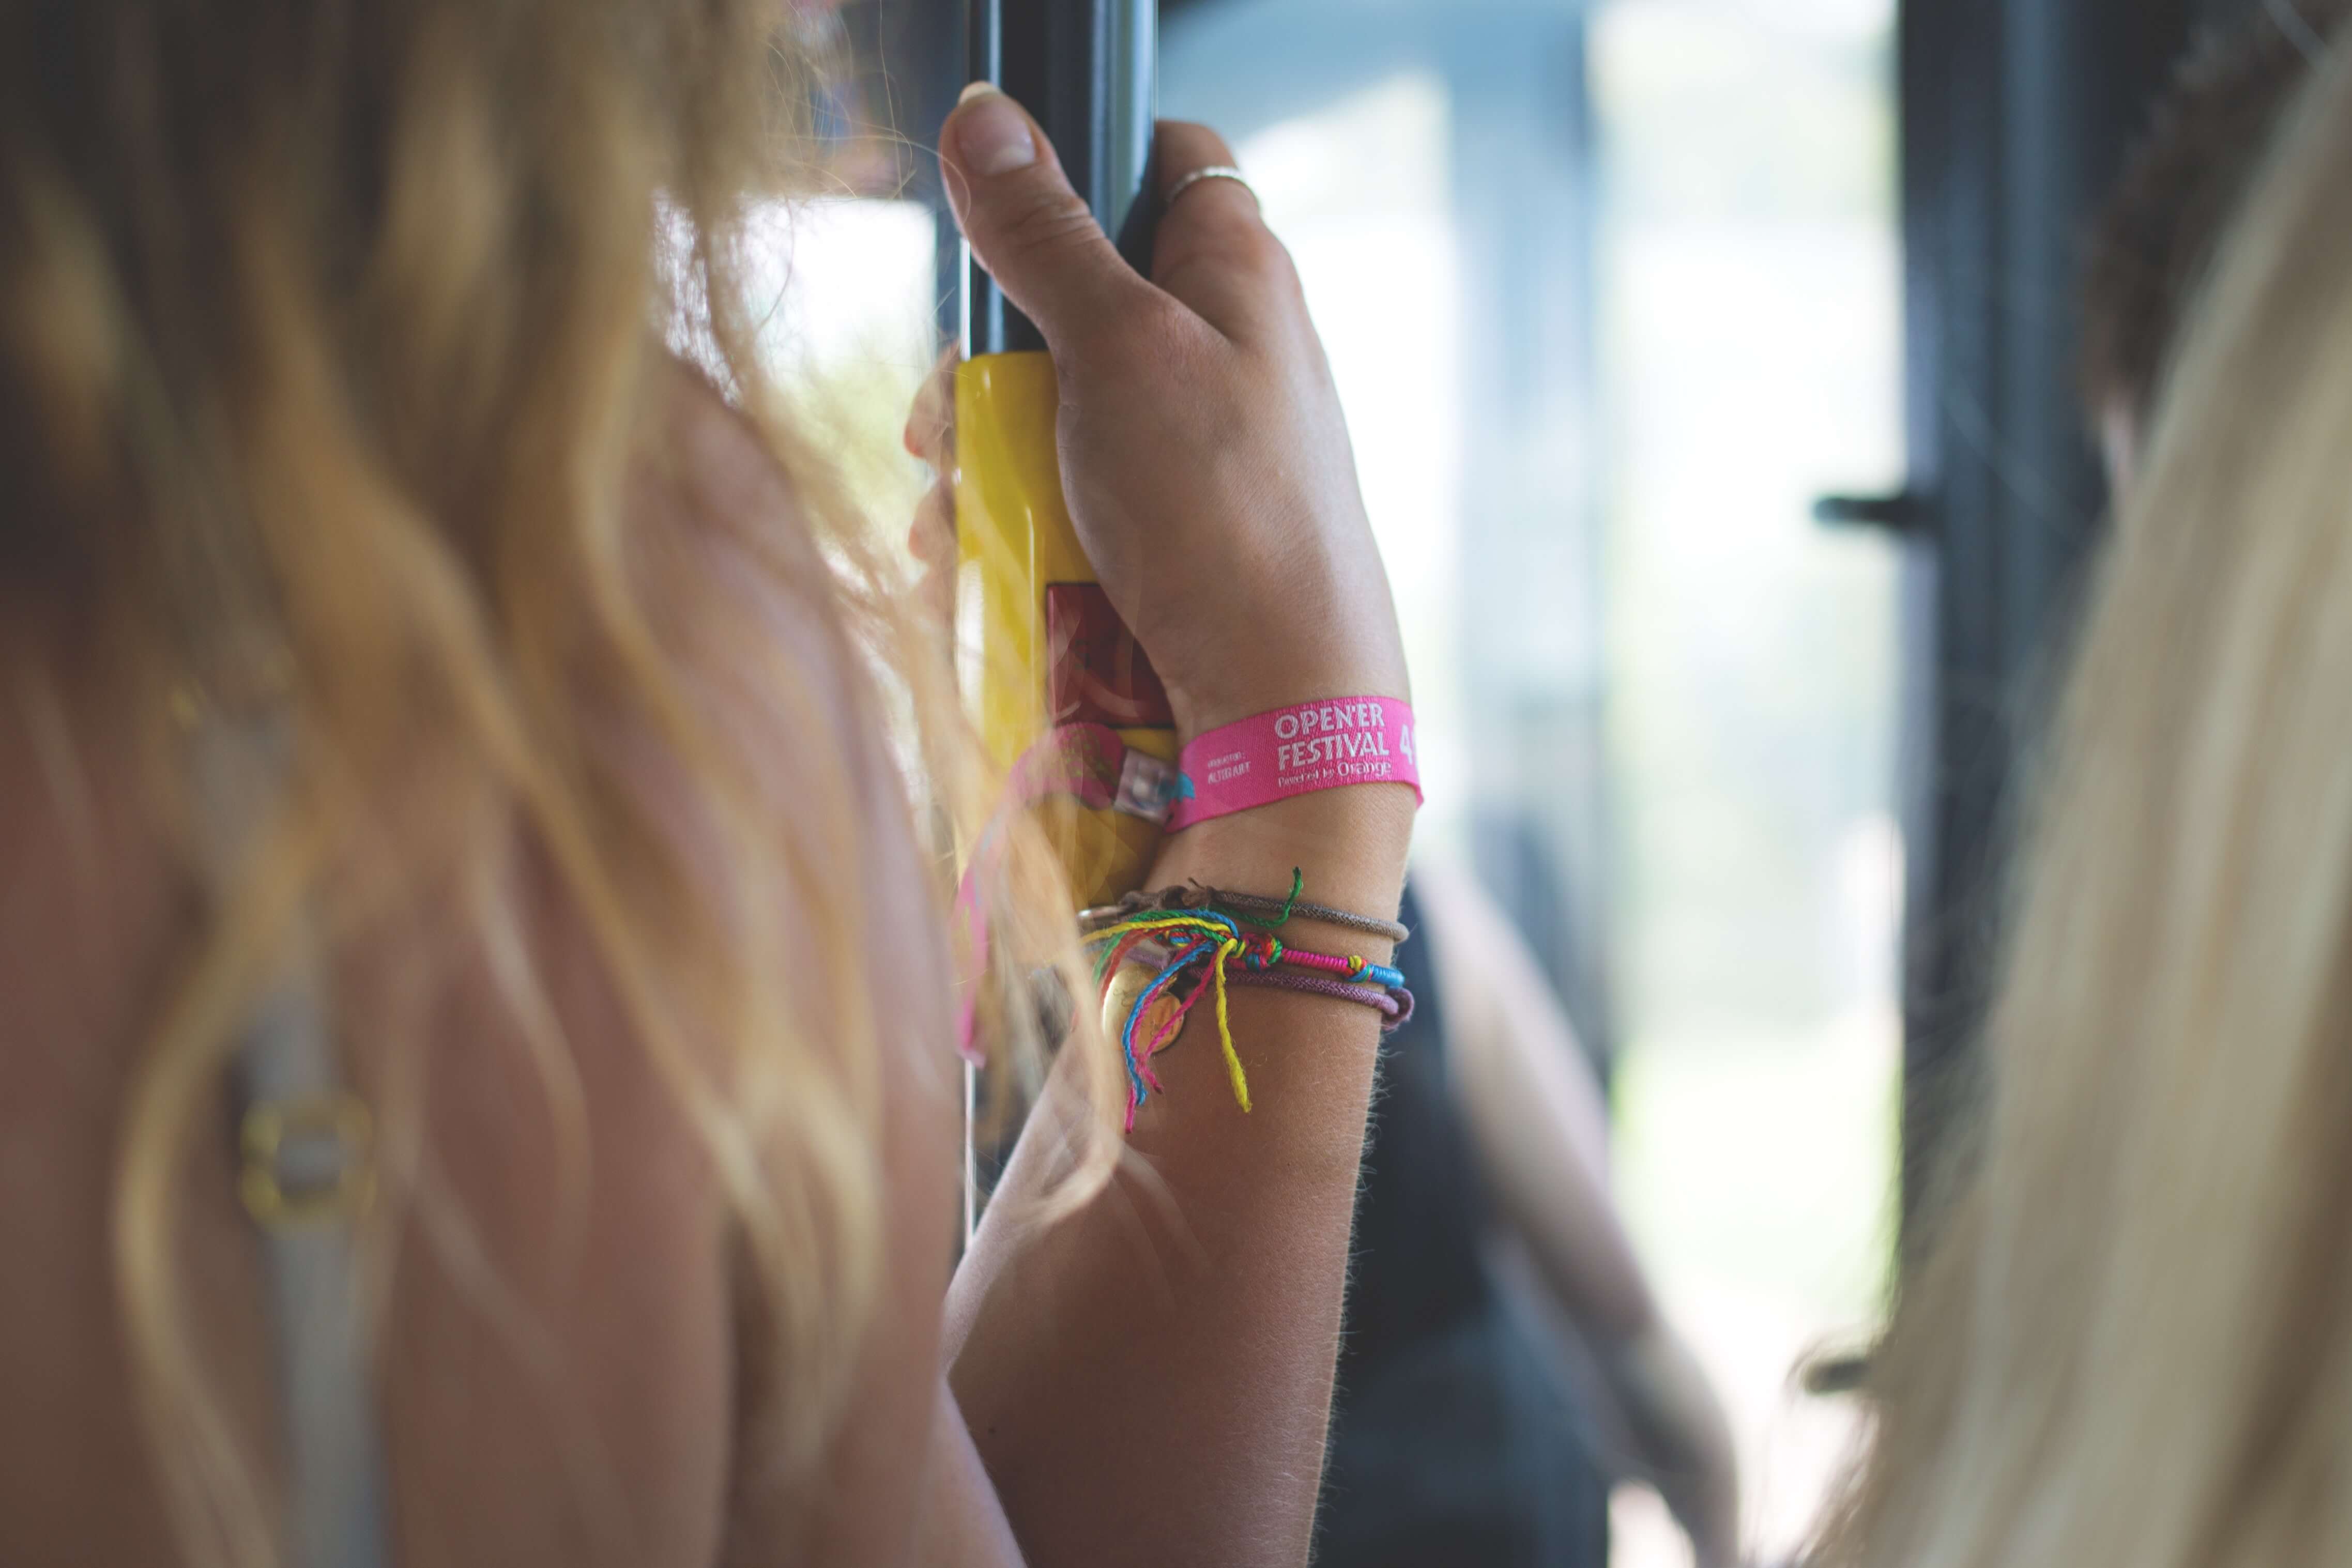 An individual wearing an event wristband.